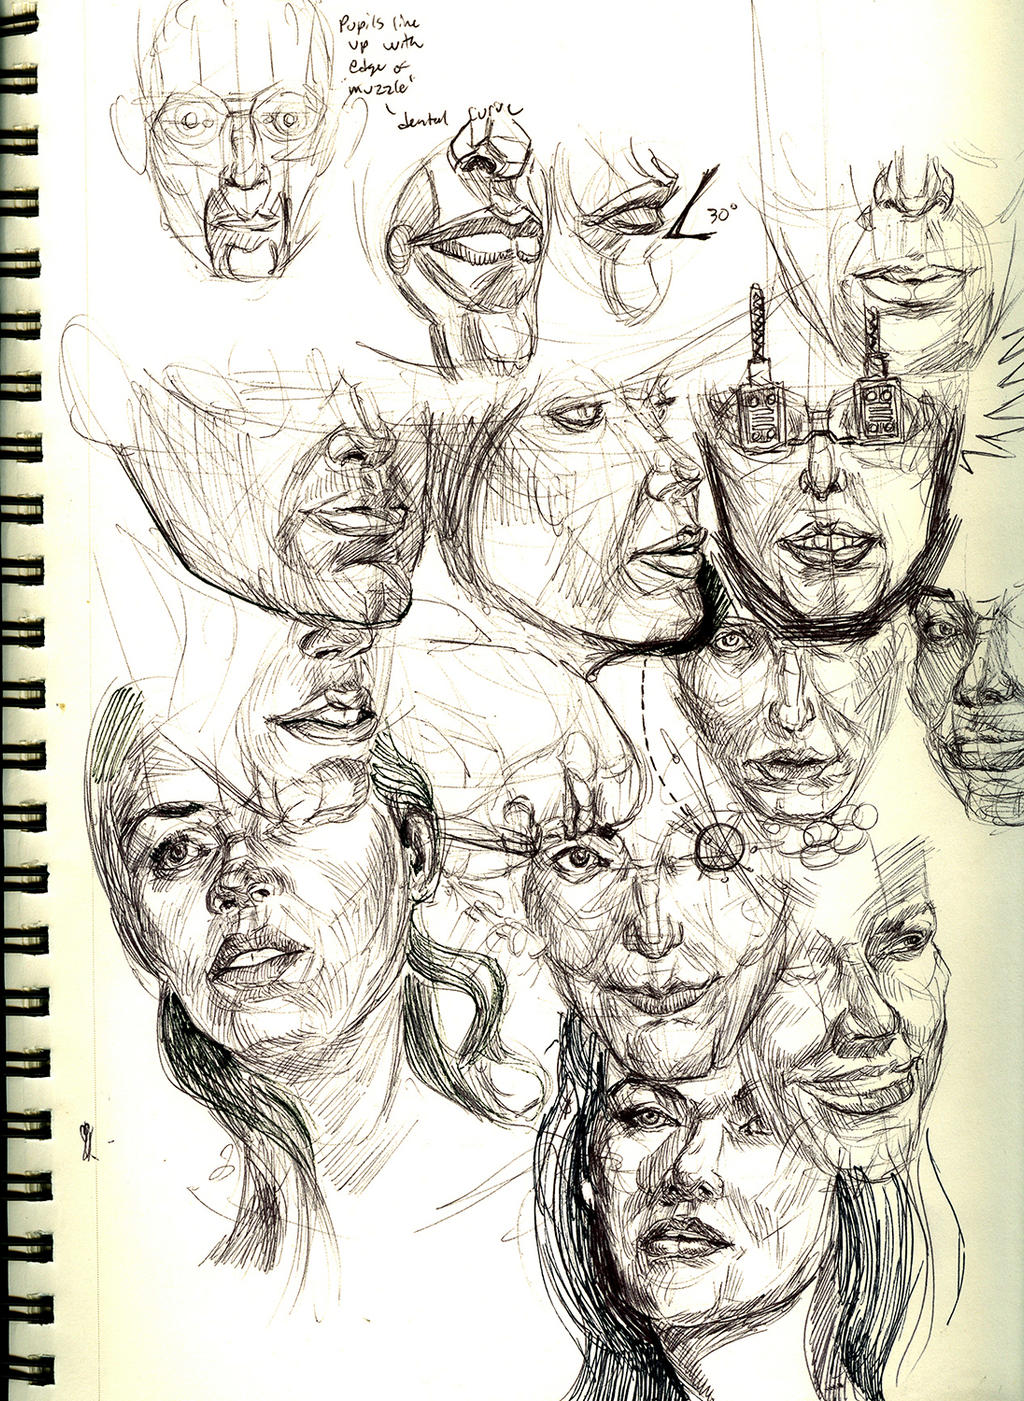 Lower face sketches